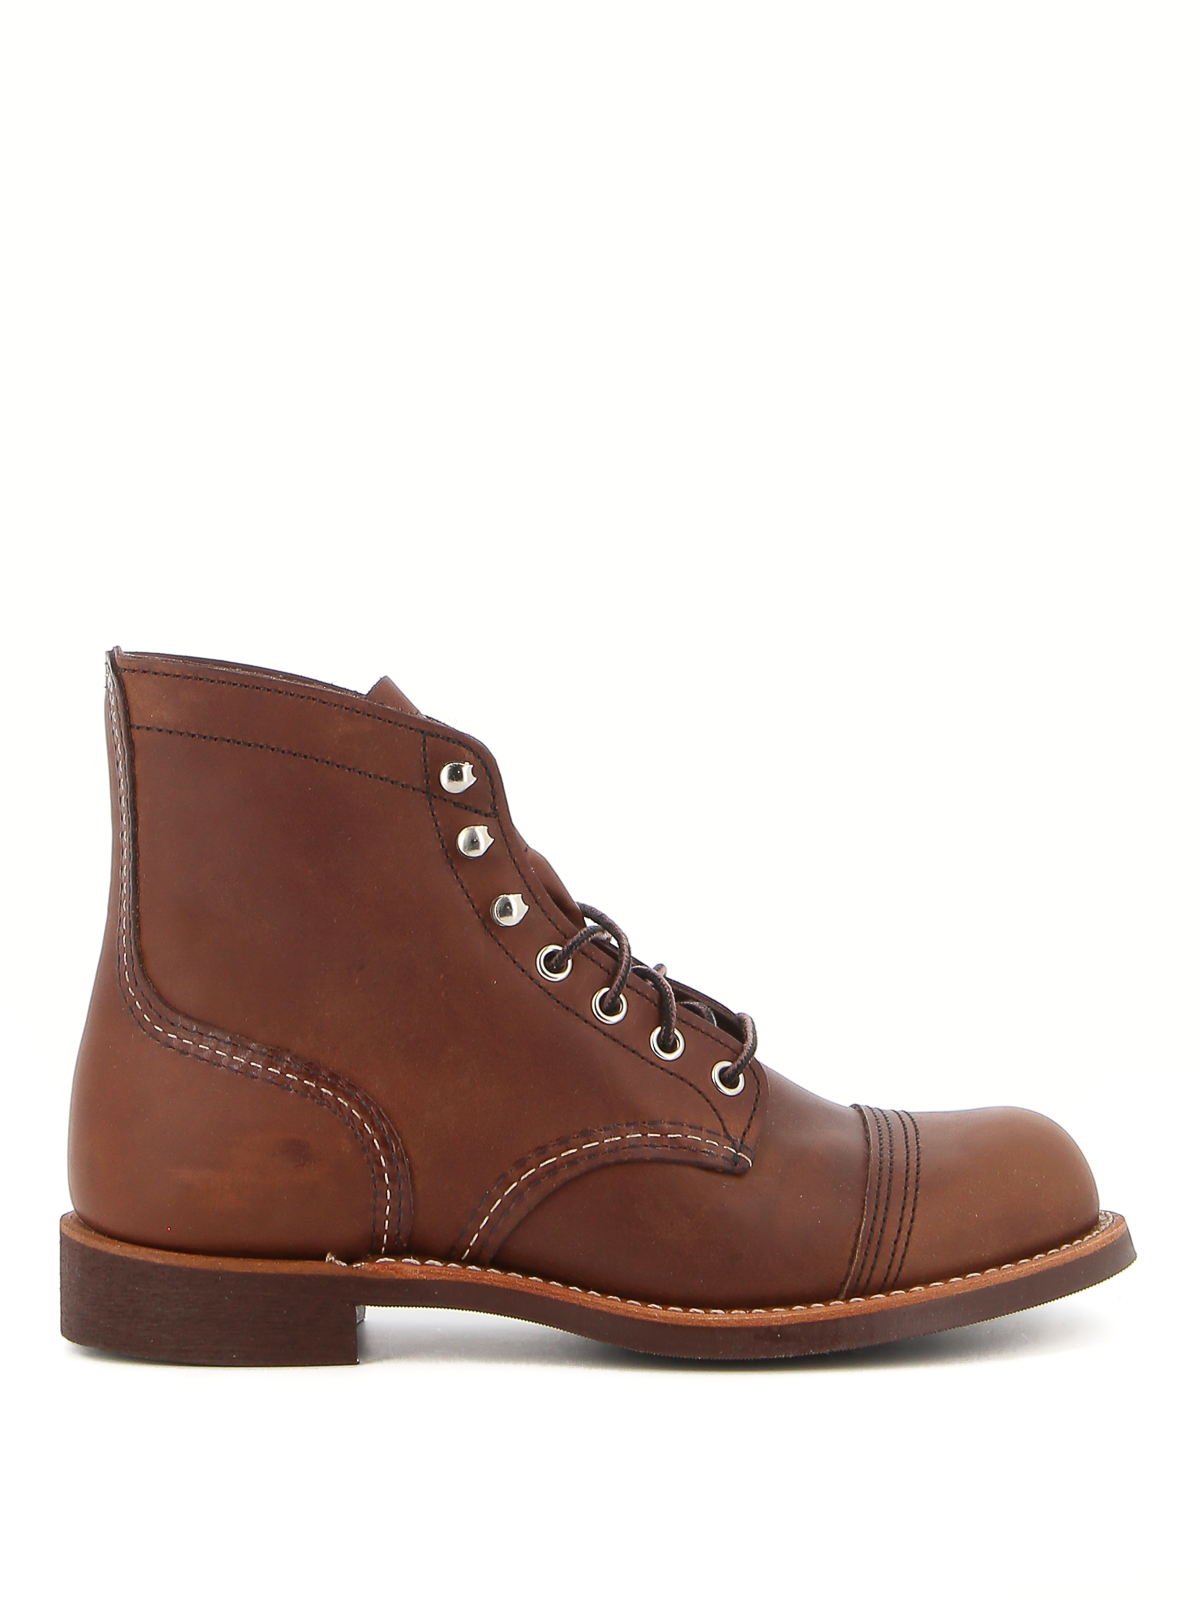 RED WING SHOES BOTINES - IRON RANGER